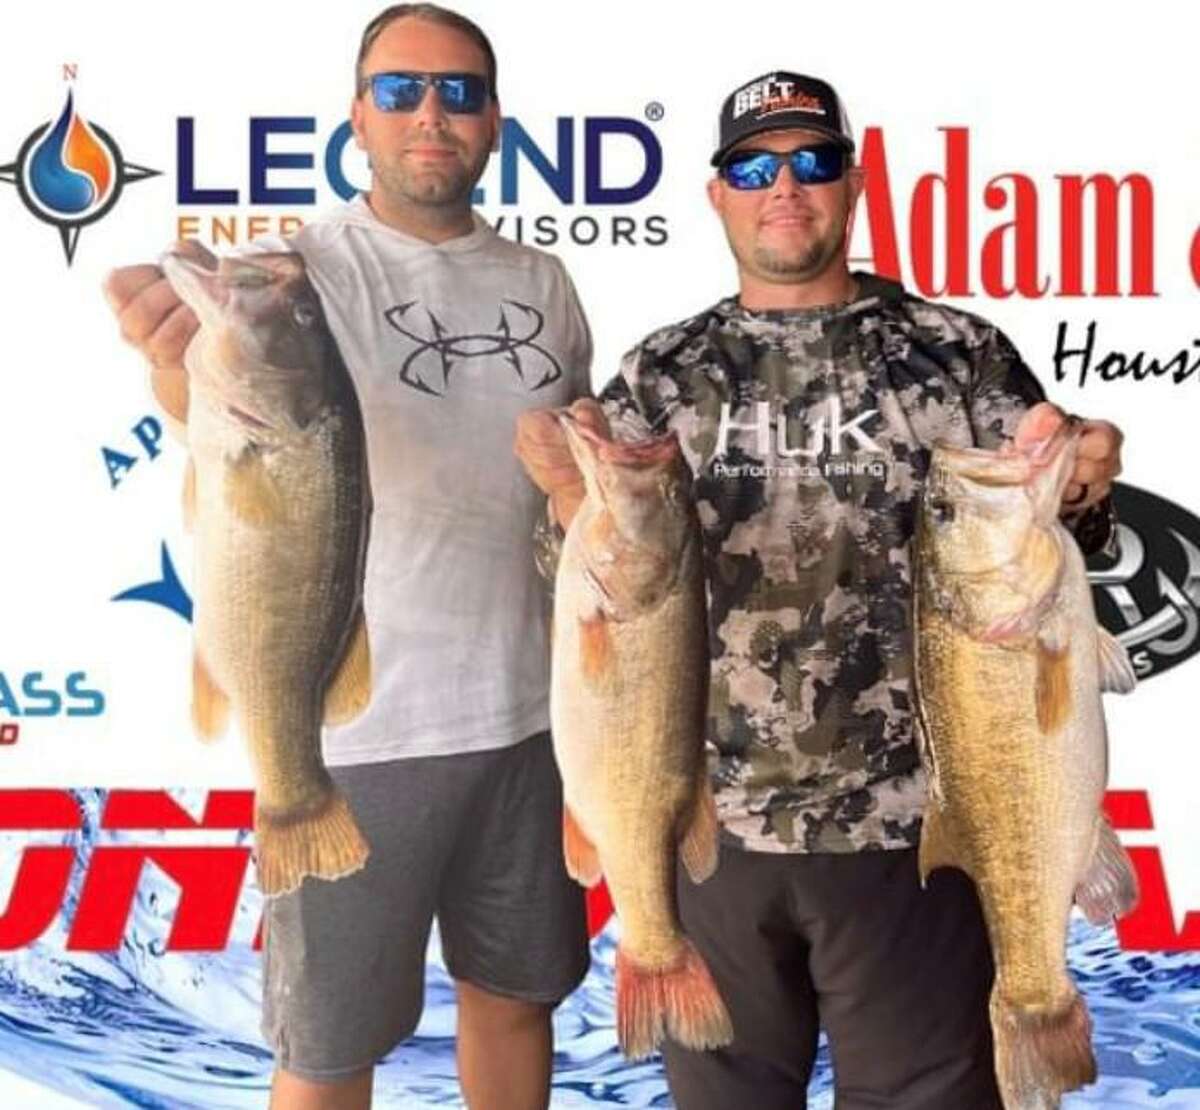 Jason Branham and Bryce Wegman came in first place in the CONROEBASS Summer Series tournament with a stringer weight of 16.55 pounds.